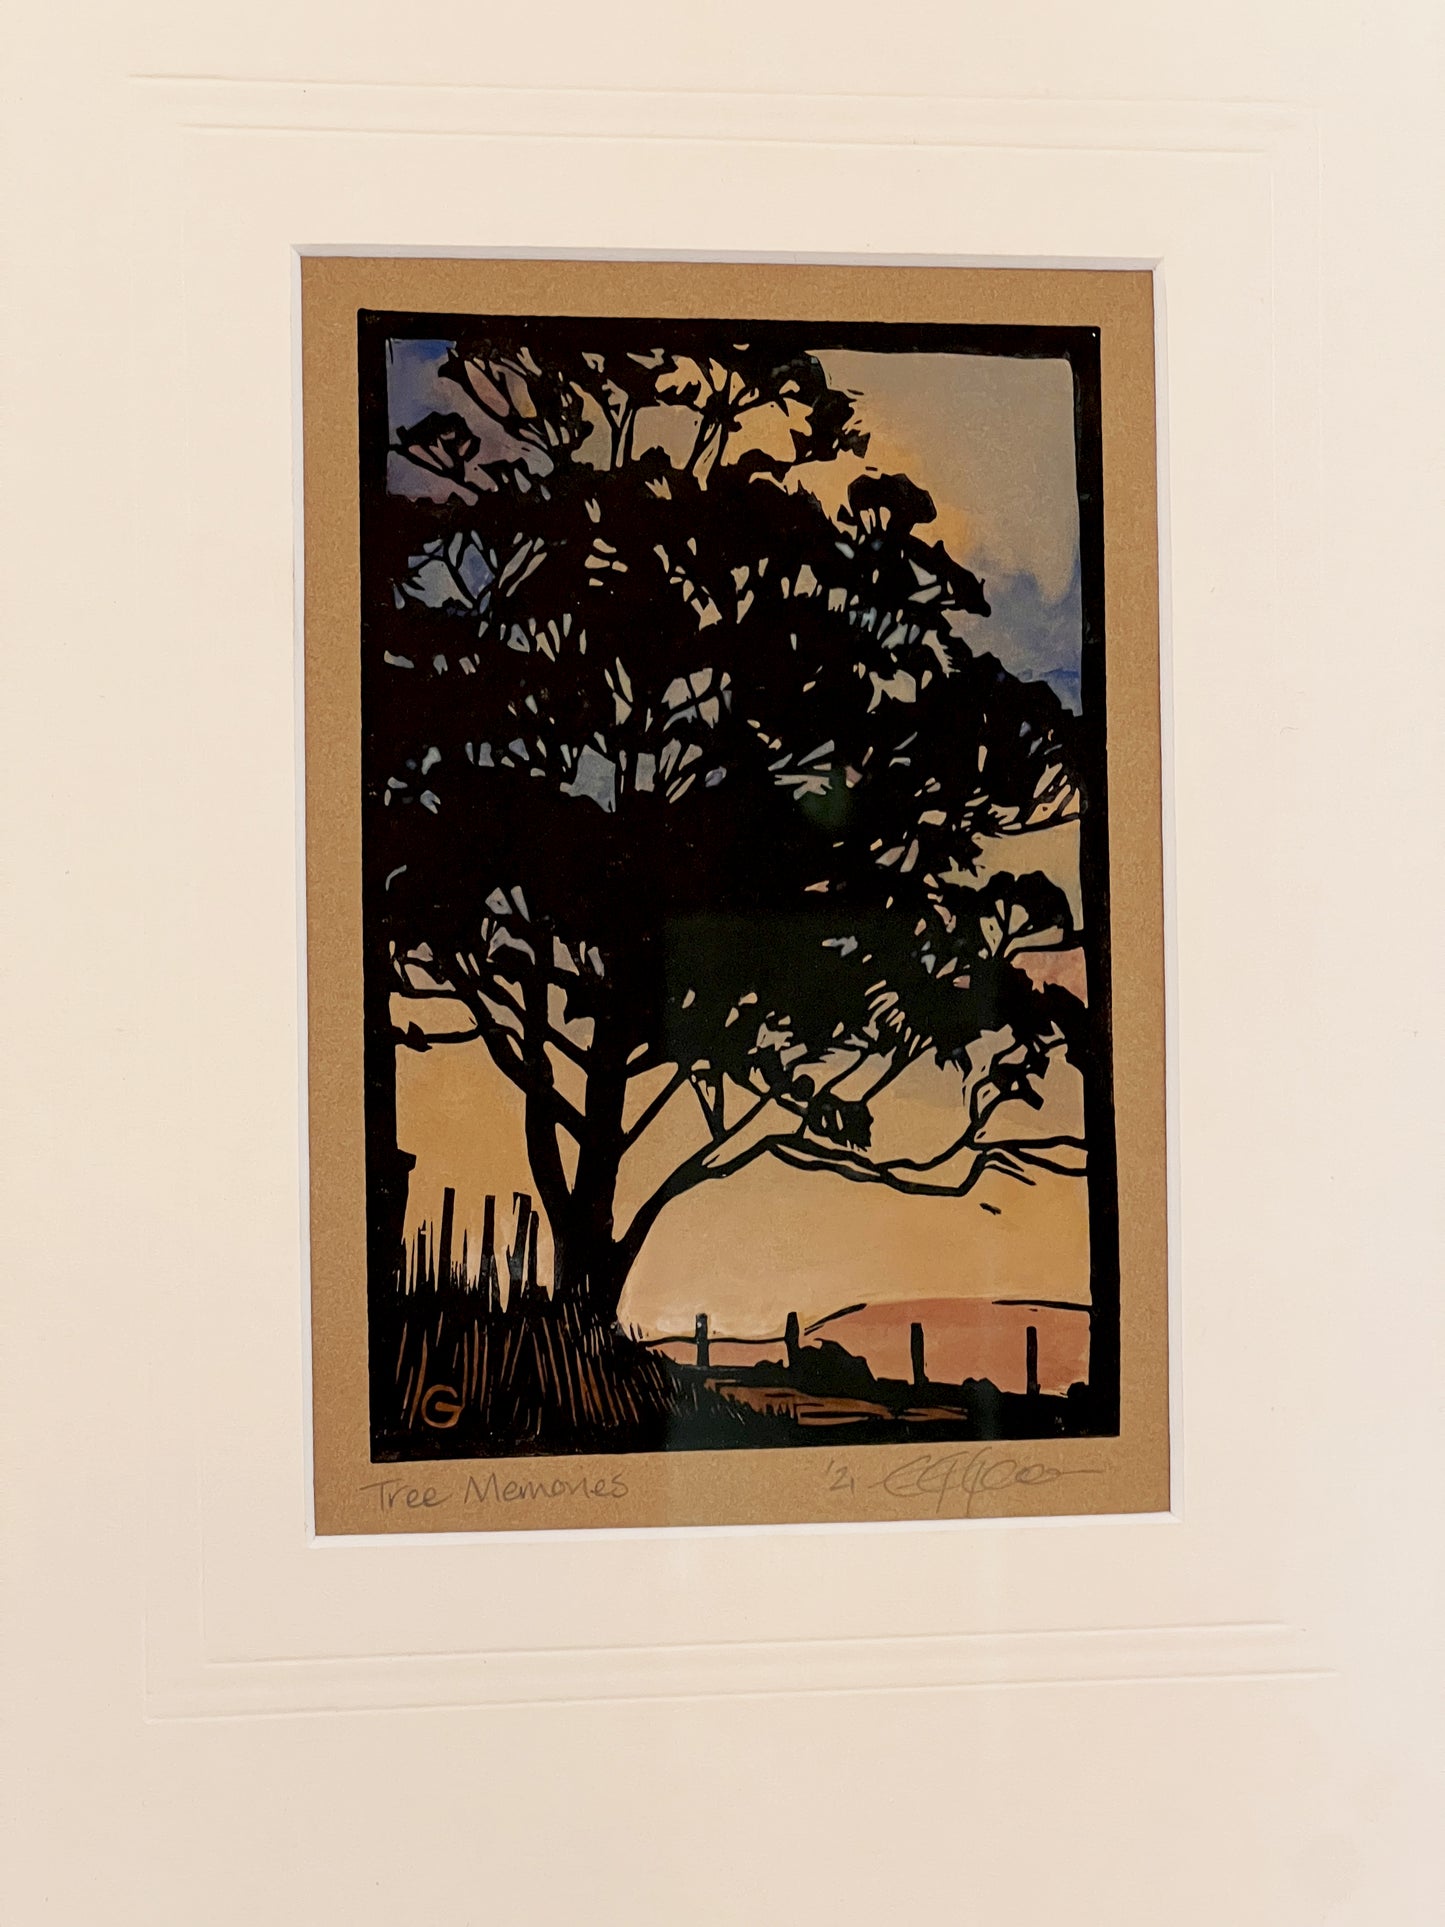 Artwork 'Tree Memories' Hand Painted Lino Print by Grace Gladdish - framed